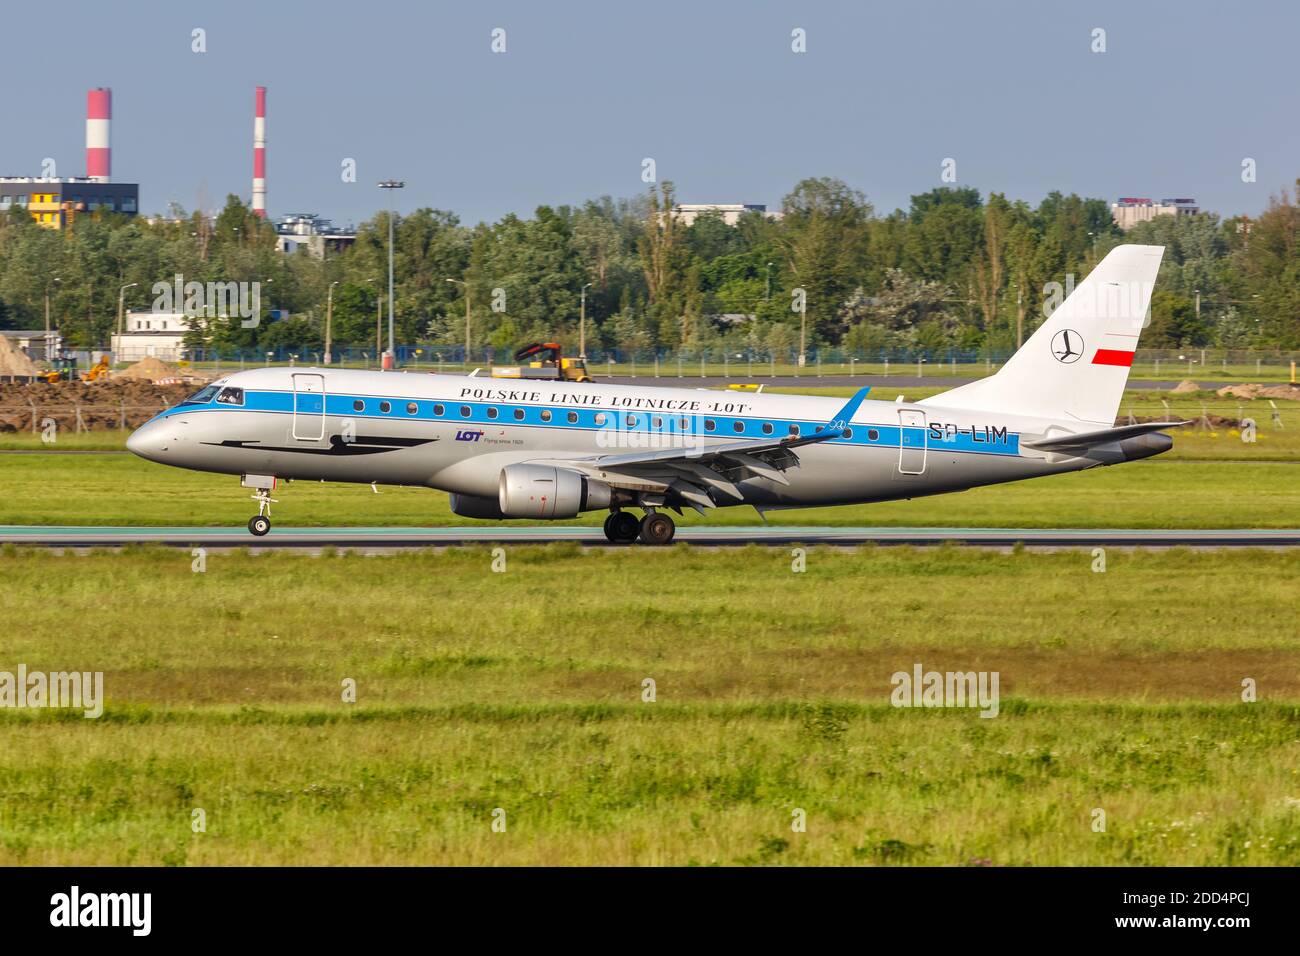 Warsaw, Poland - May 26, 2019: LOT Polskie Linie Lotnicze Embraer 175 airplane in the Retro livery at Warsaw Warszawa Airport (WAW) in Poland. Stock Photo